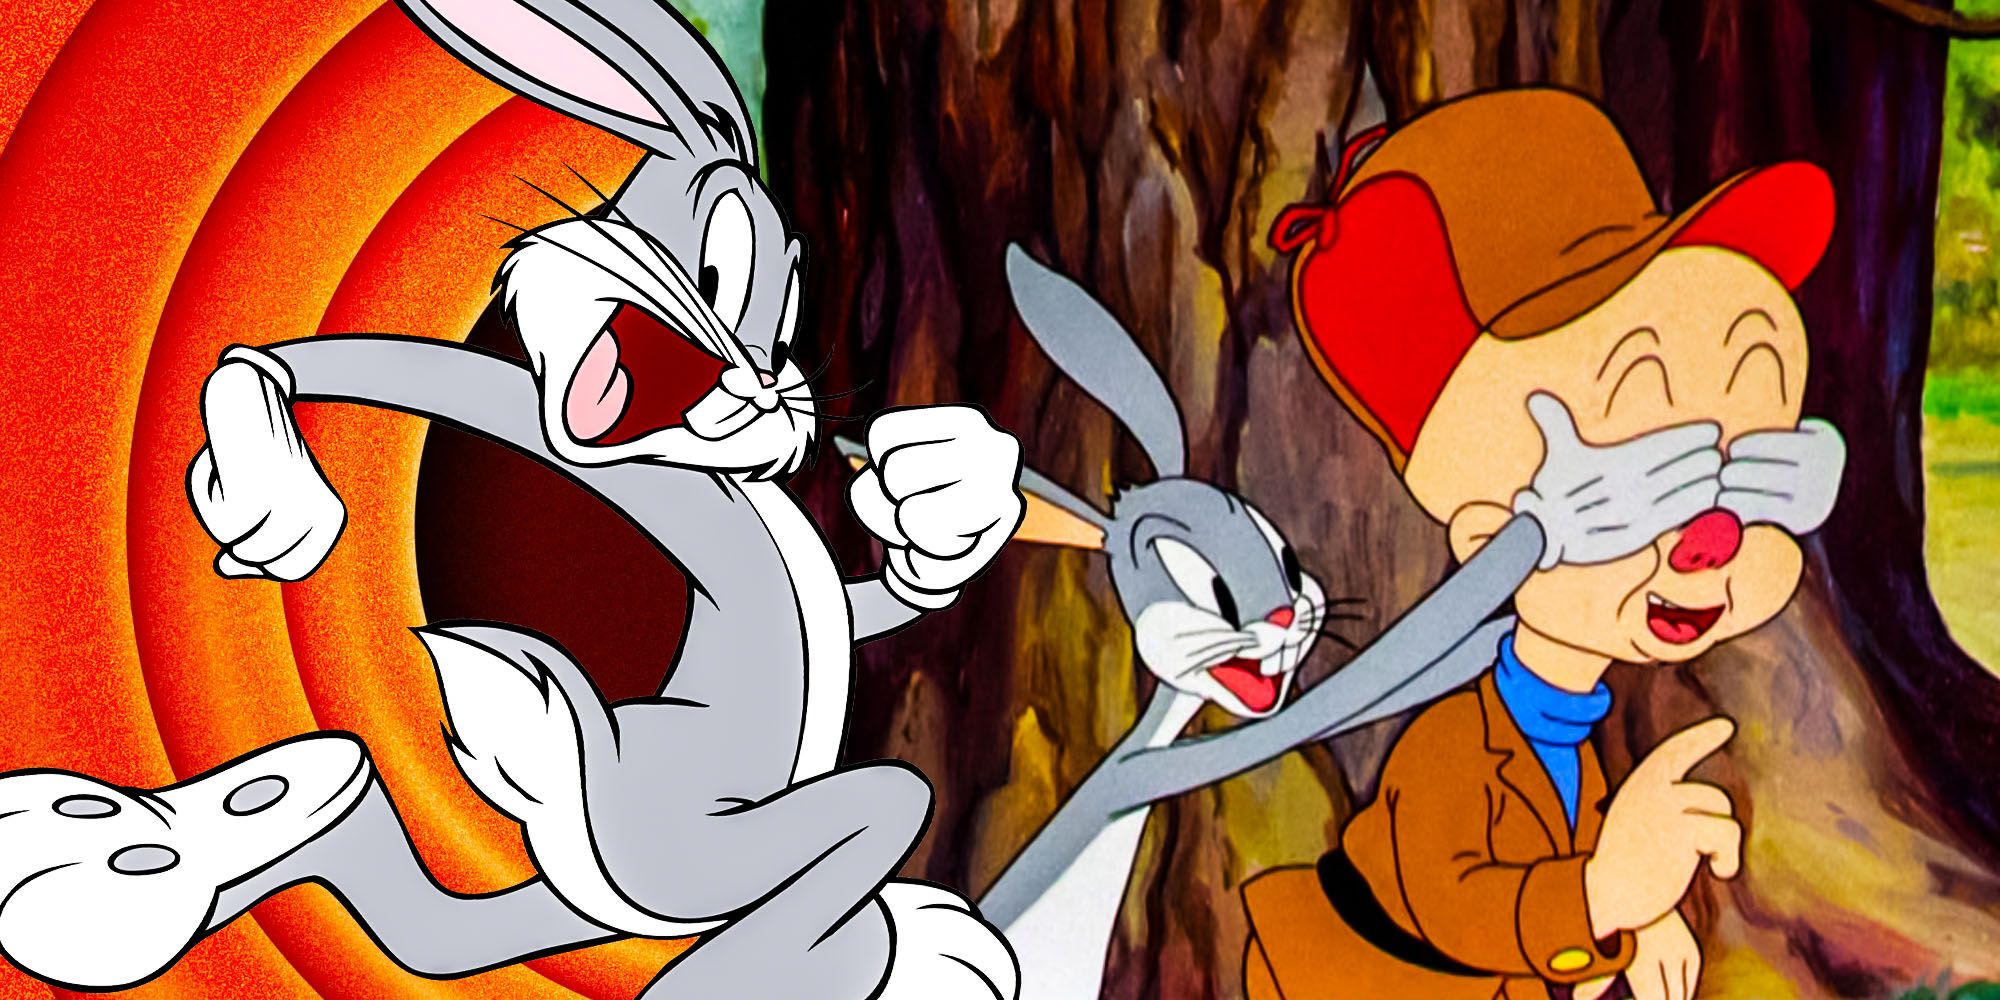 The Cartoon Bugs Bunny Debuted On (Not Looney Tunes)